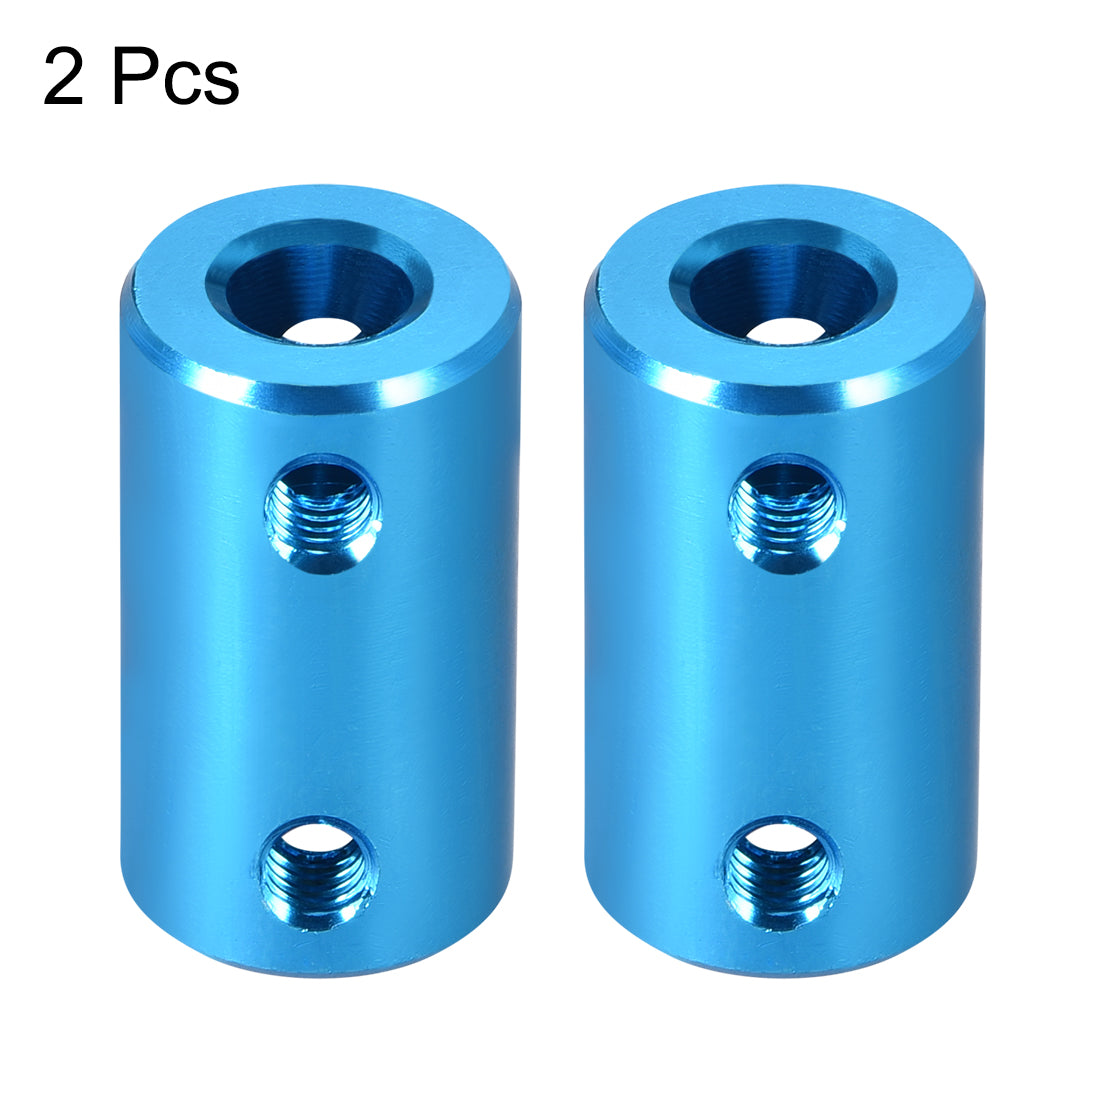 uxcell Uxcell Shaft Coupling 6.35mm to 6.35mm Bore L25xD14 Robot Motor Wheel Rigid Coupler Connector Blue 2 Pcs